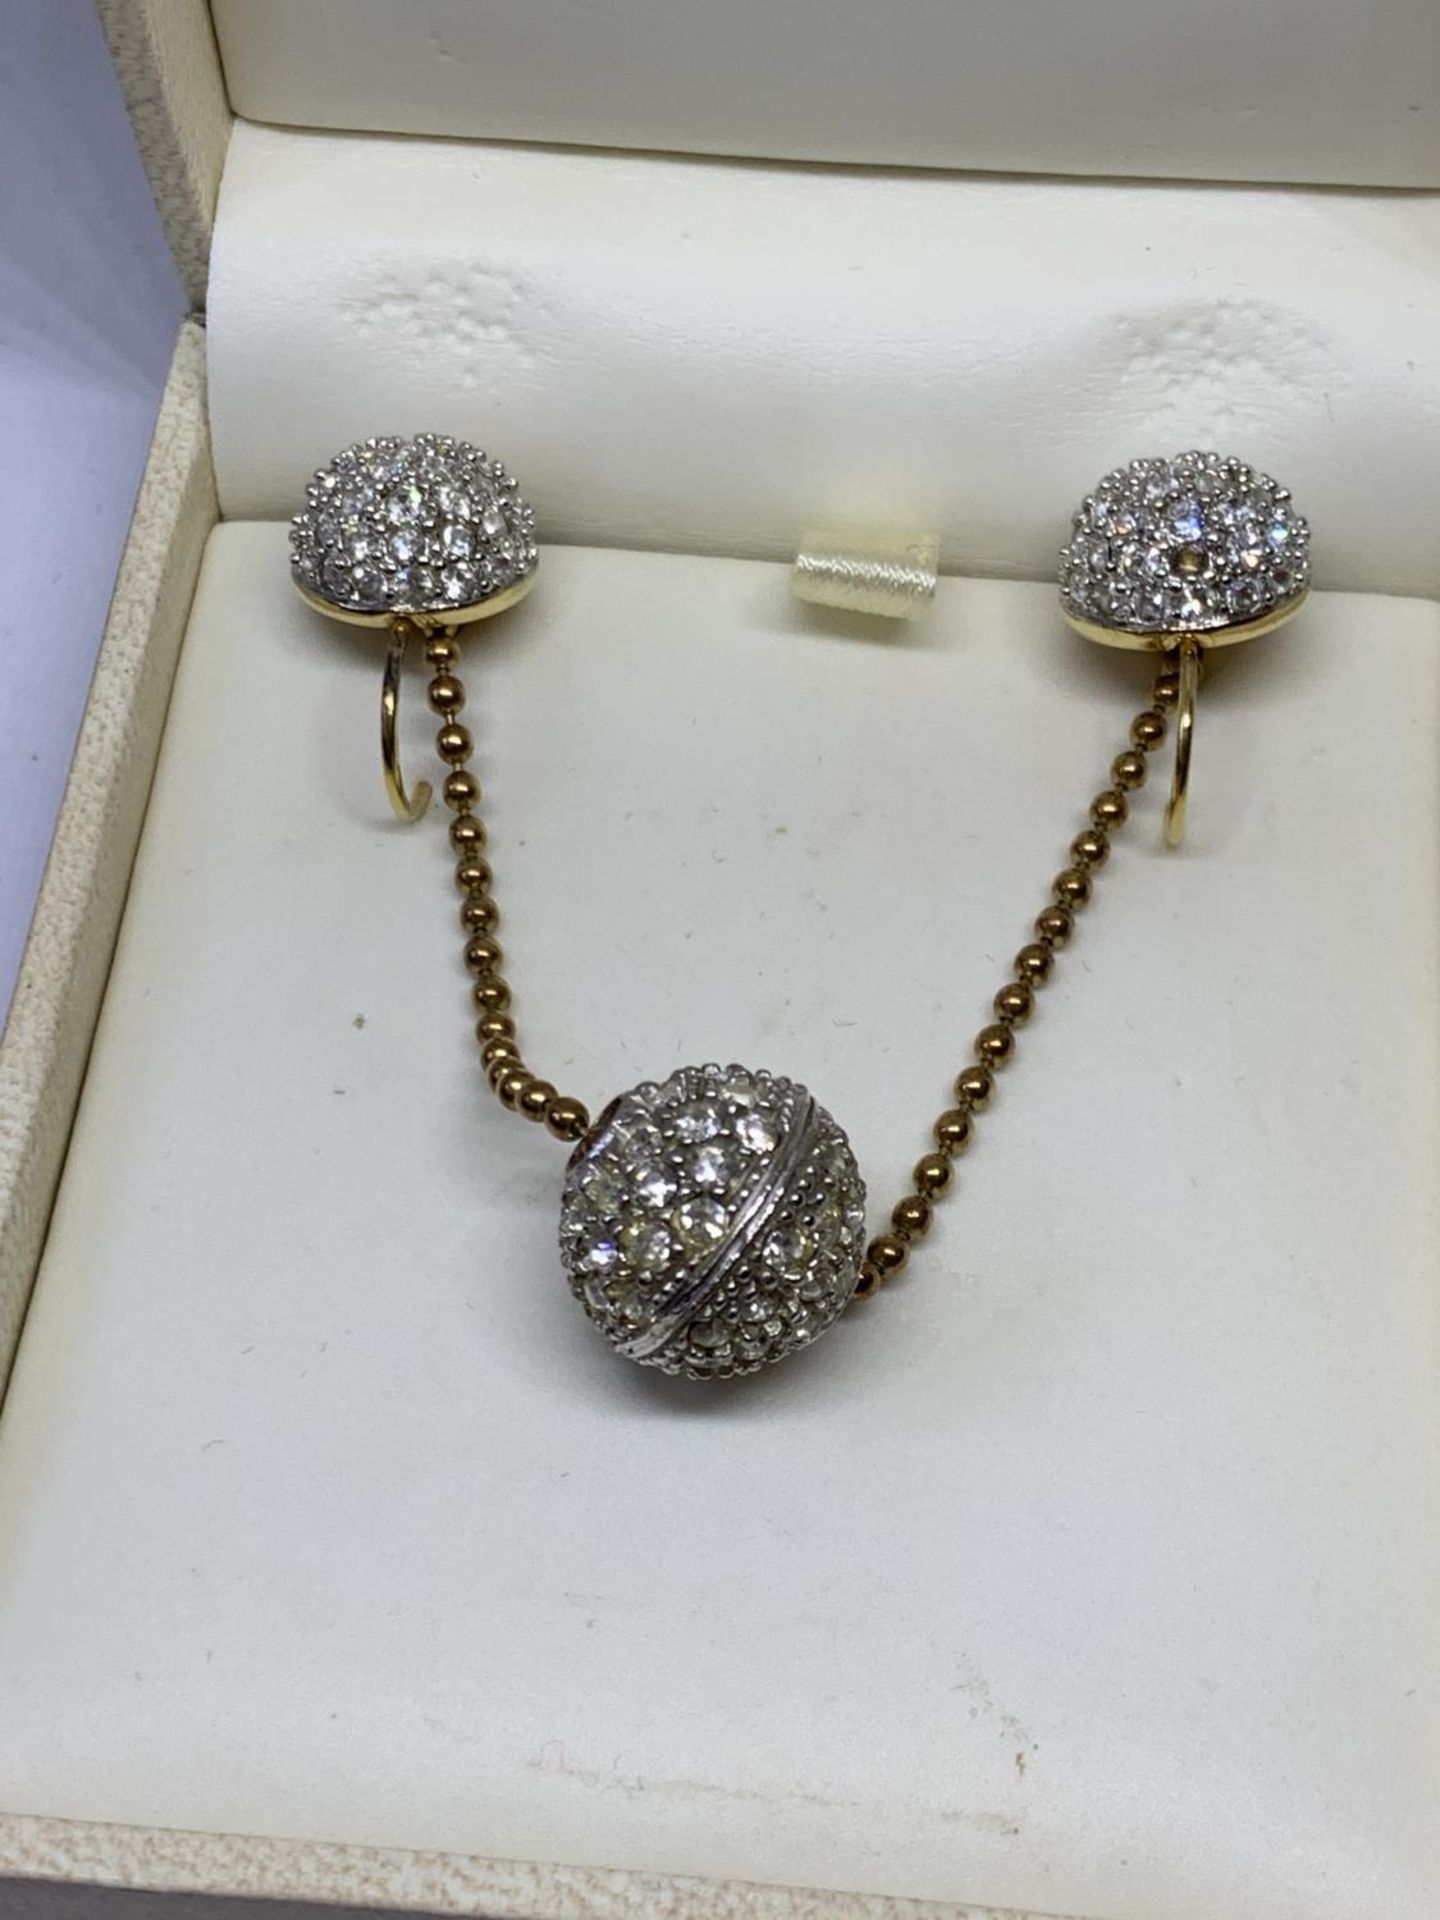 A SILVER BALL NECKLACE AND EARRINGS WITH PRESENTATION BOX